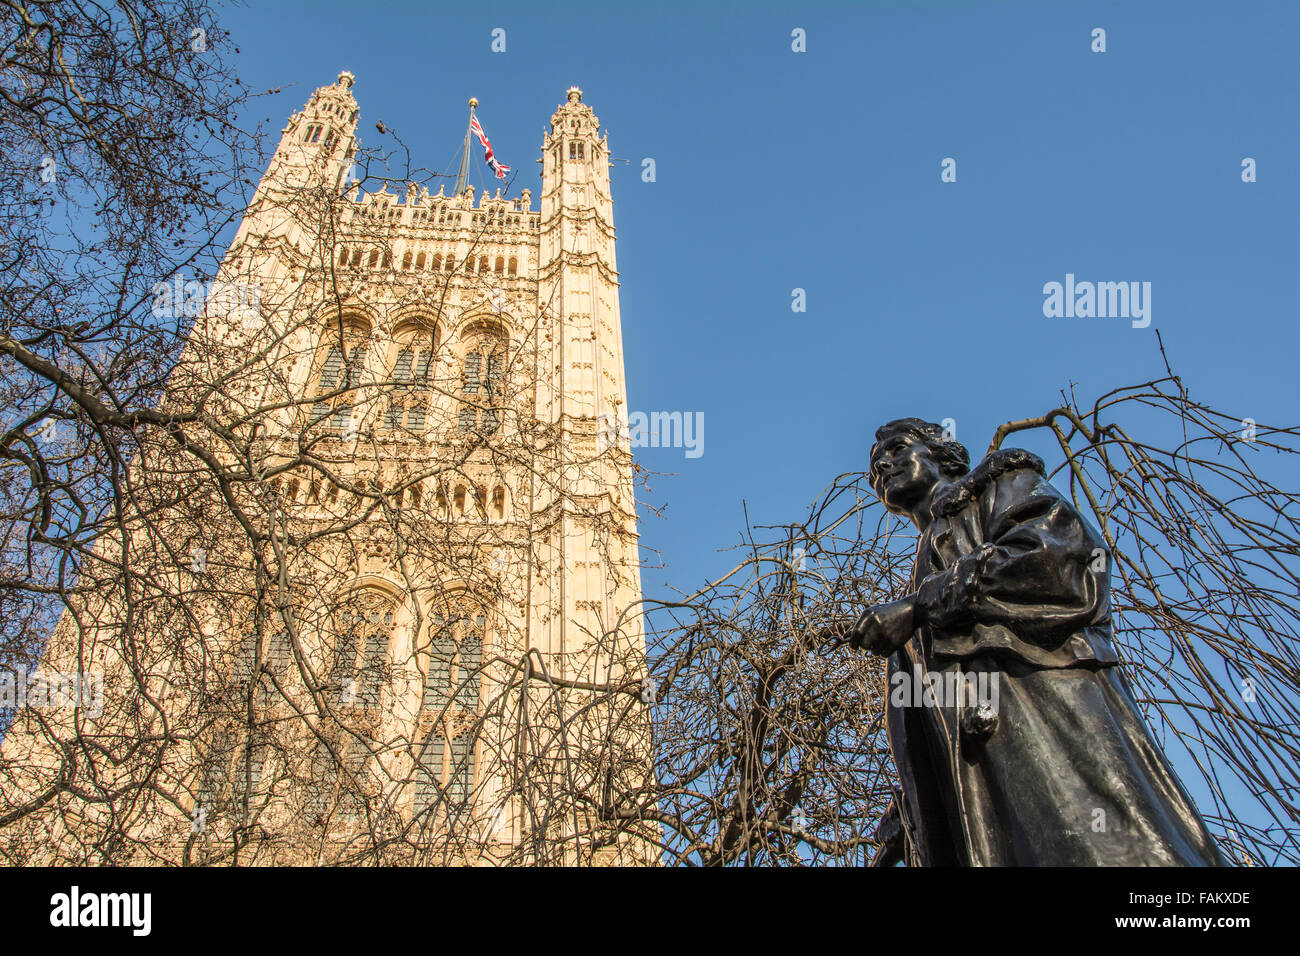 Statue of Emmeline Pankhurst outside The Houses of Parliament in Westminster, London, England, U.K. Stock Photo